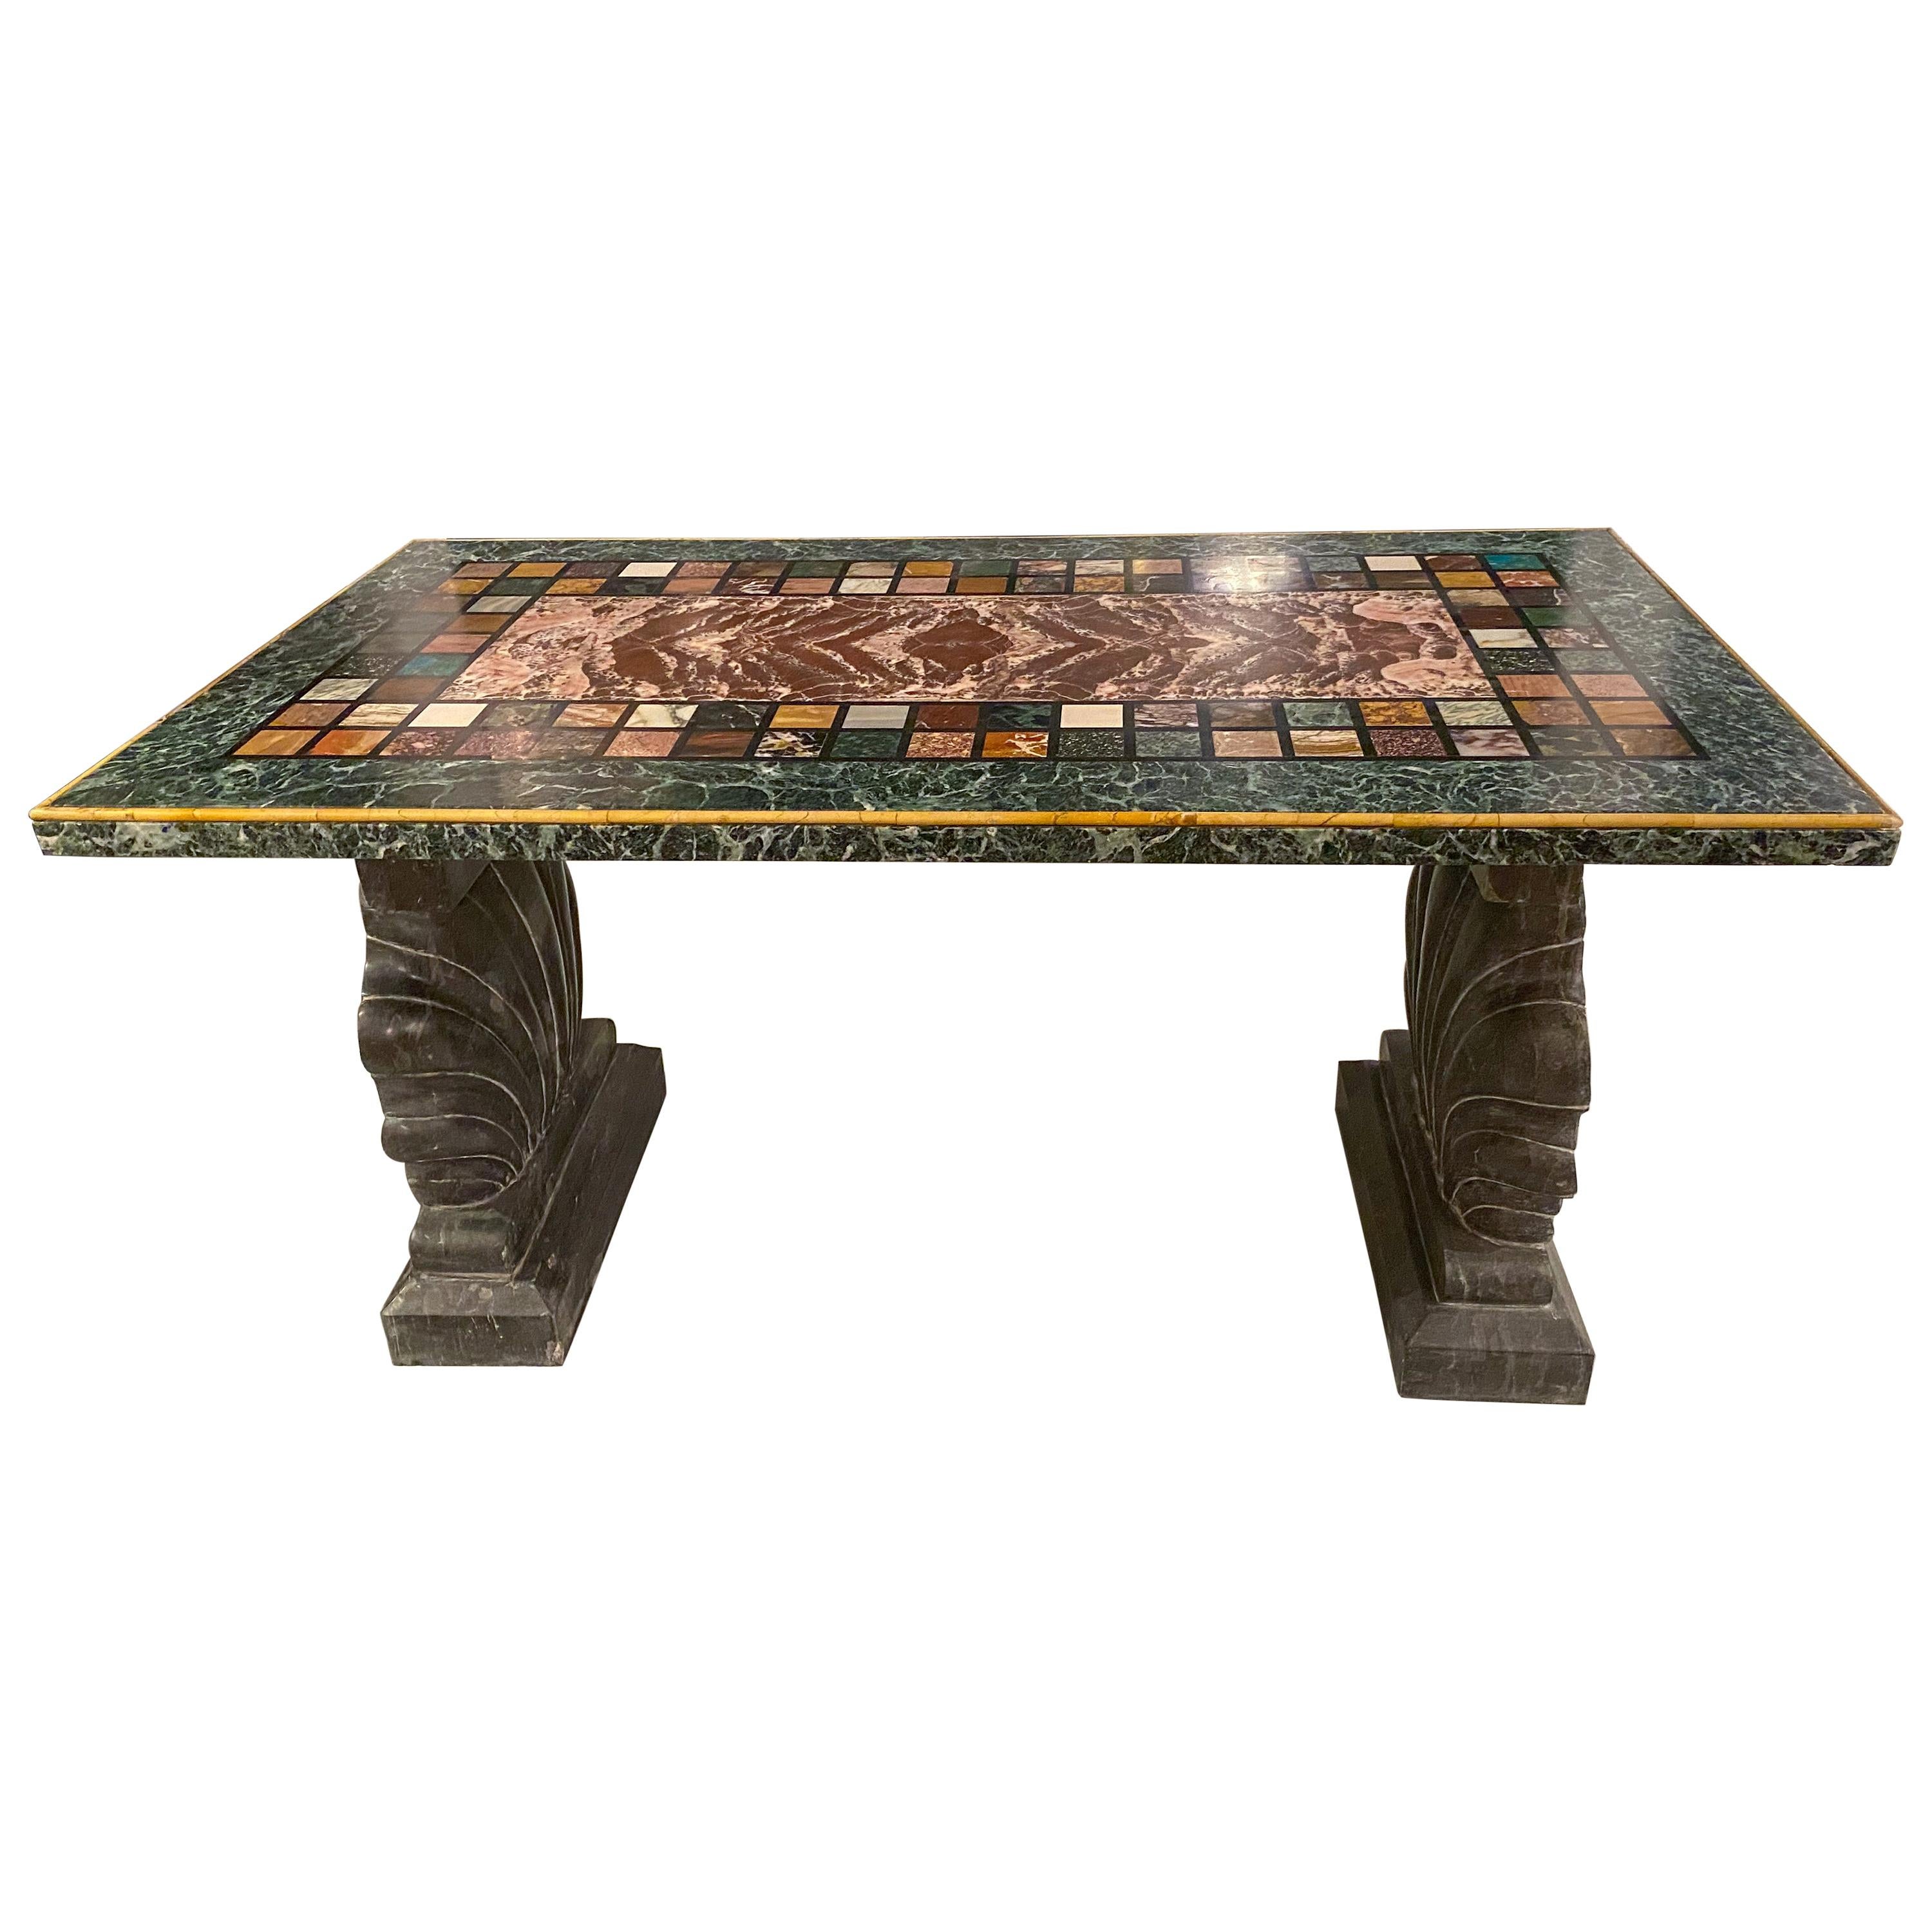 Baroque An Unusual “Specimen Petra Dura” Marble Top Table For Sale